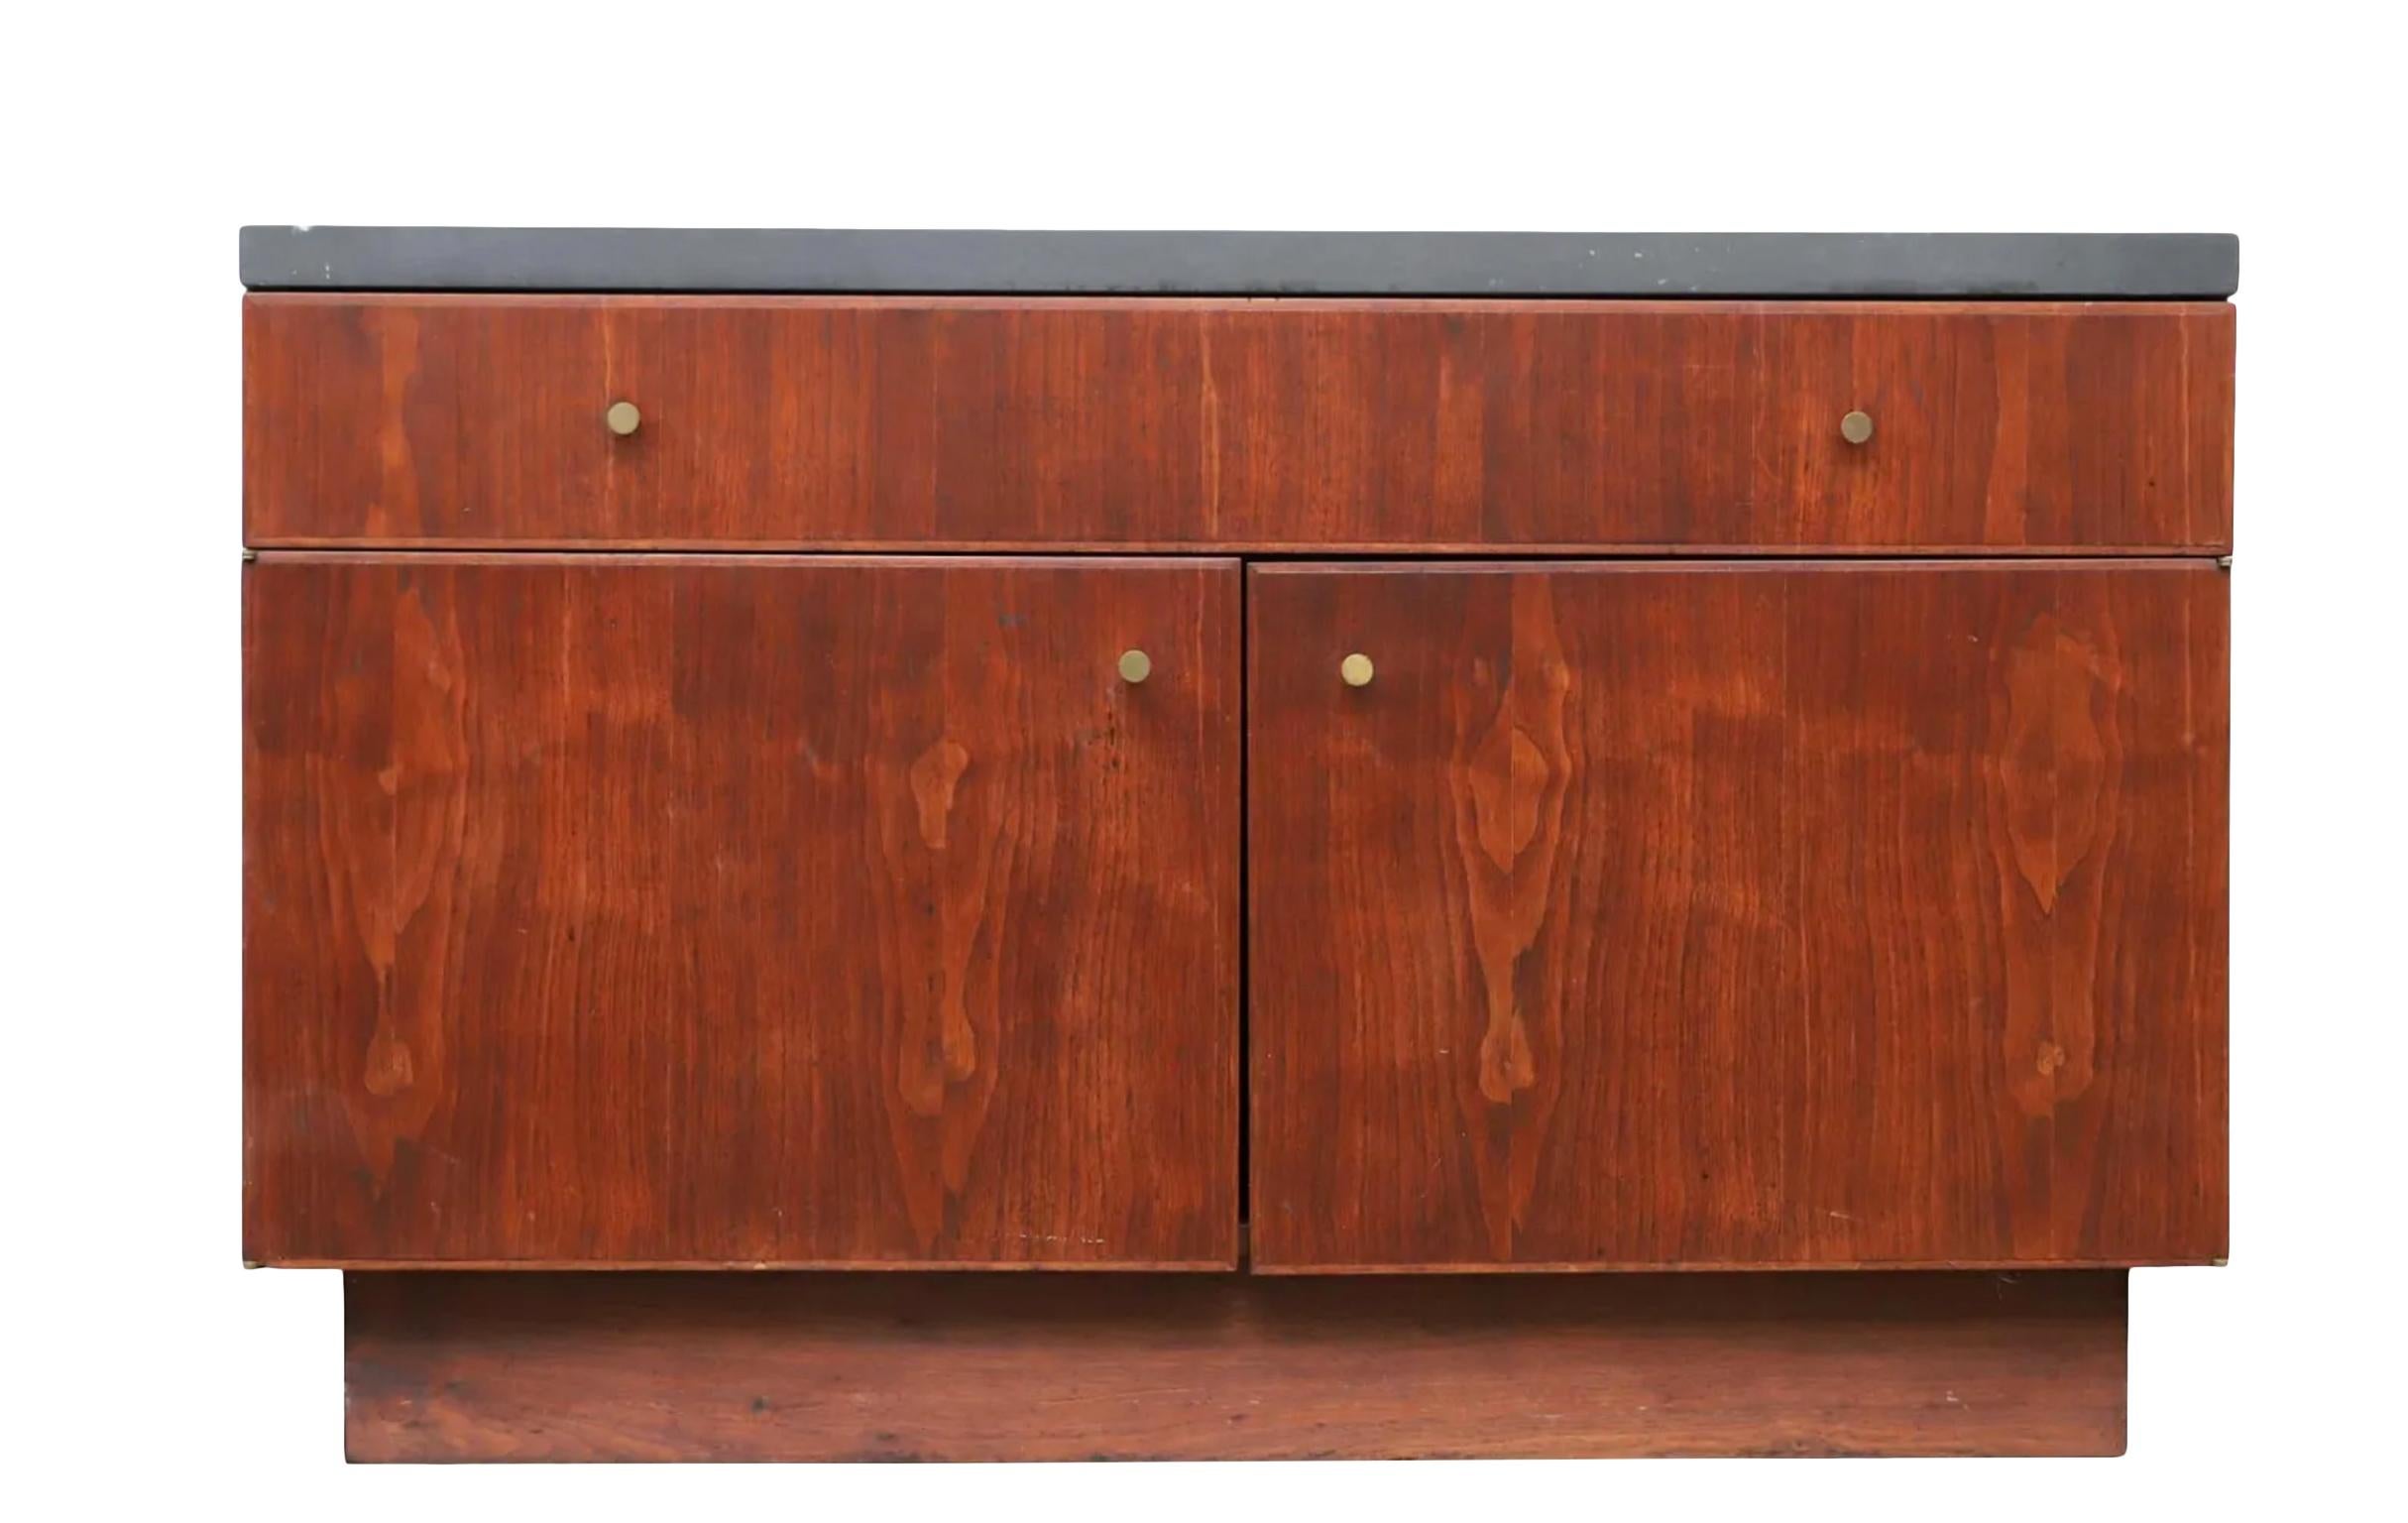 Mid century American Studio craft thick slate top black walnut credenza cabinet. beautiful hand crafted solid black walnut single drawer cabinet. Has 2 Lower doors with Brass Knobs lower area is wide open no shelves - great for storage. Has 1.25